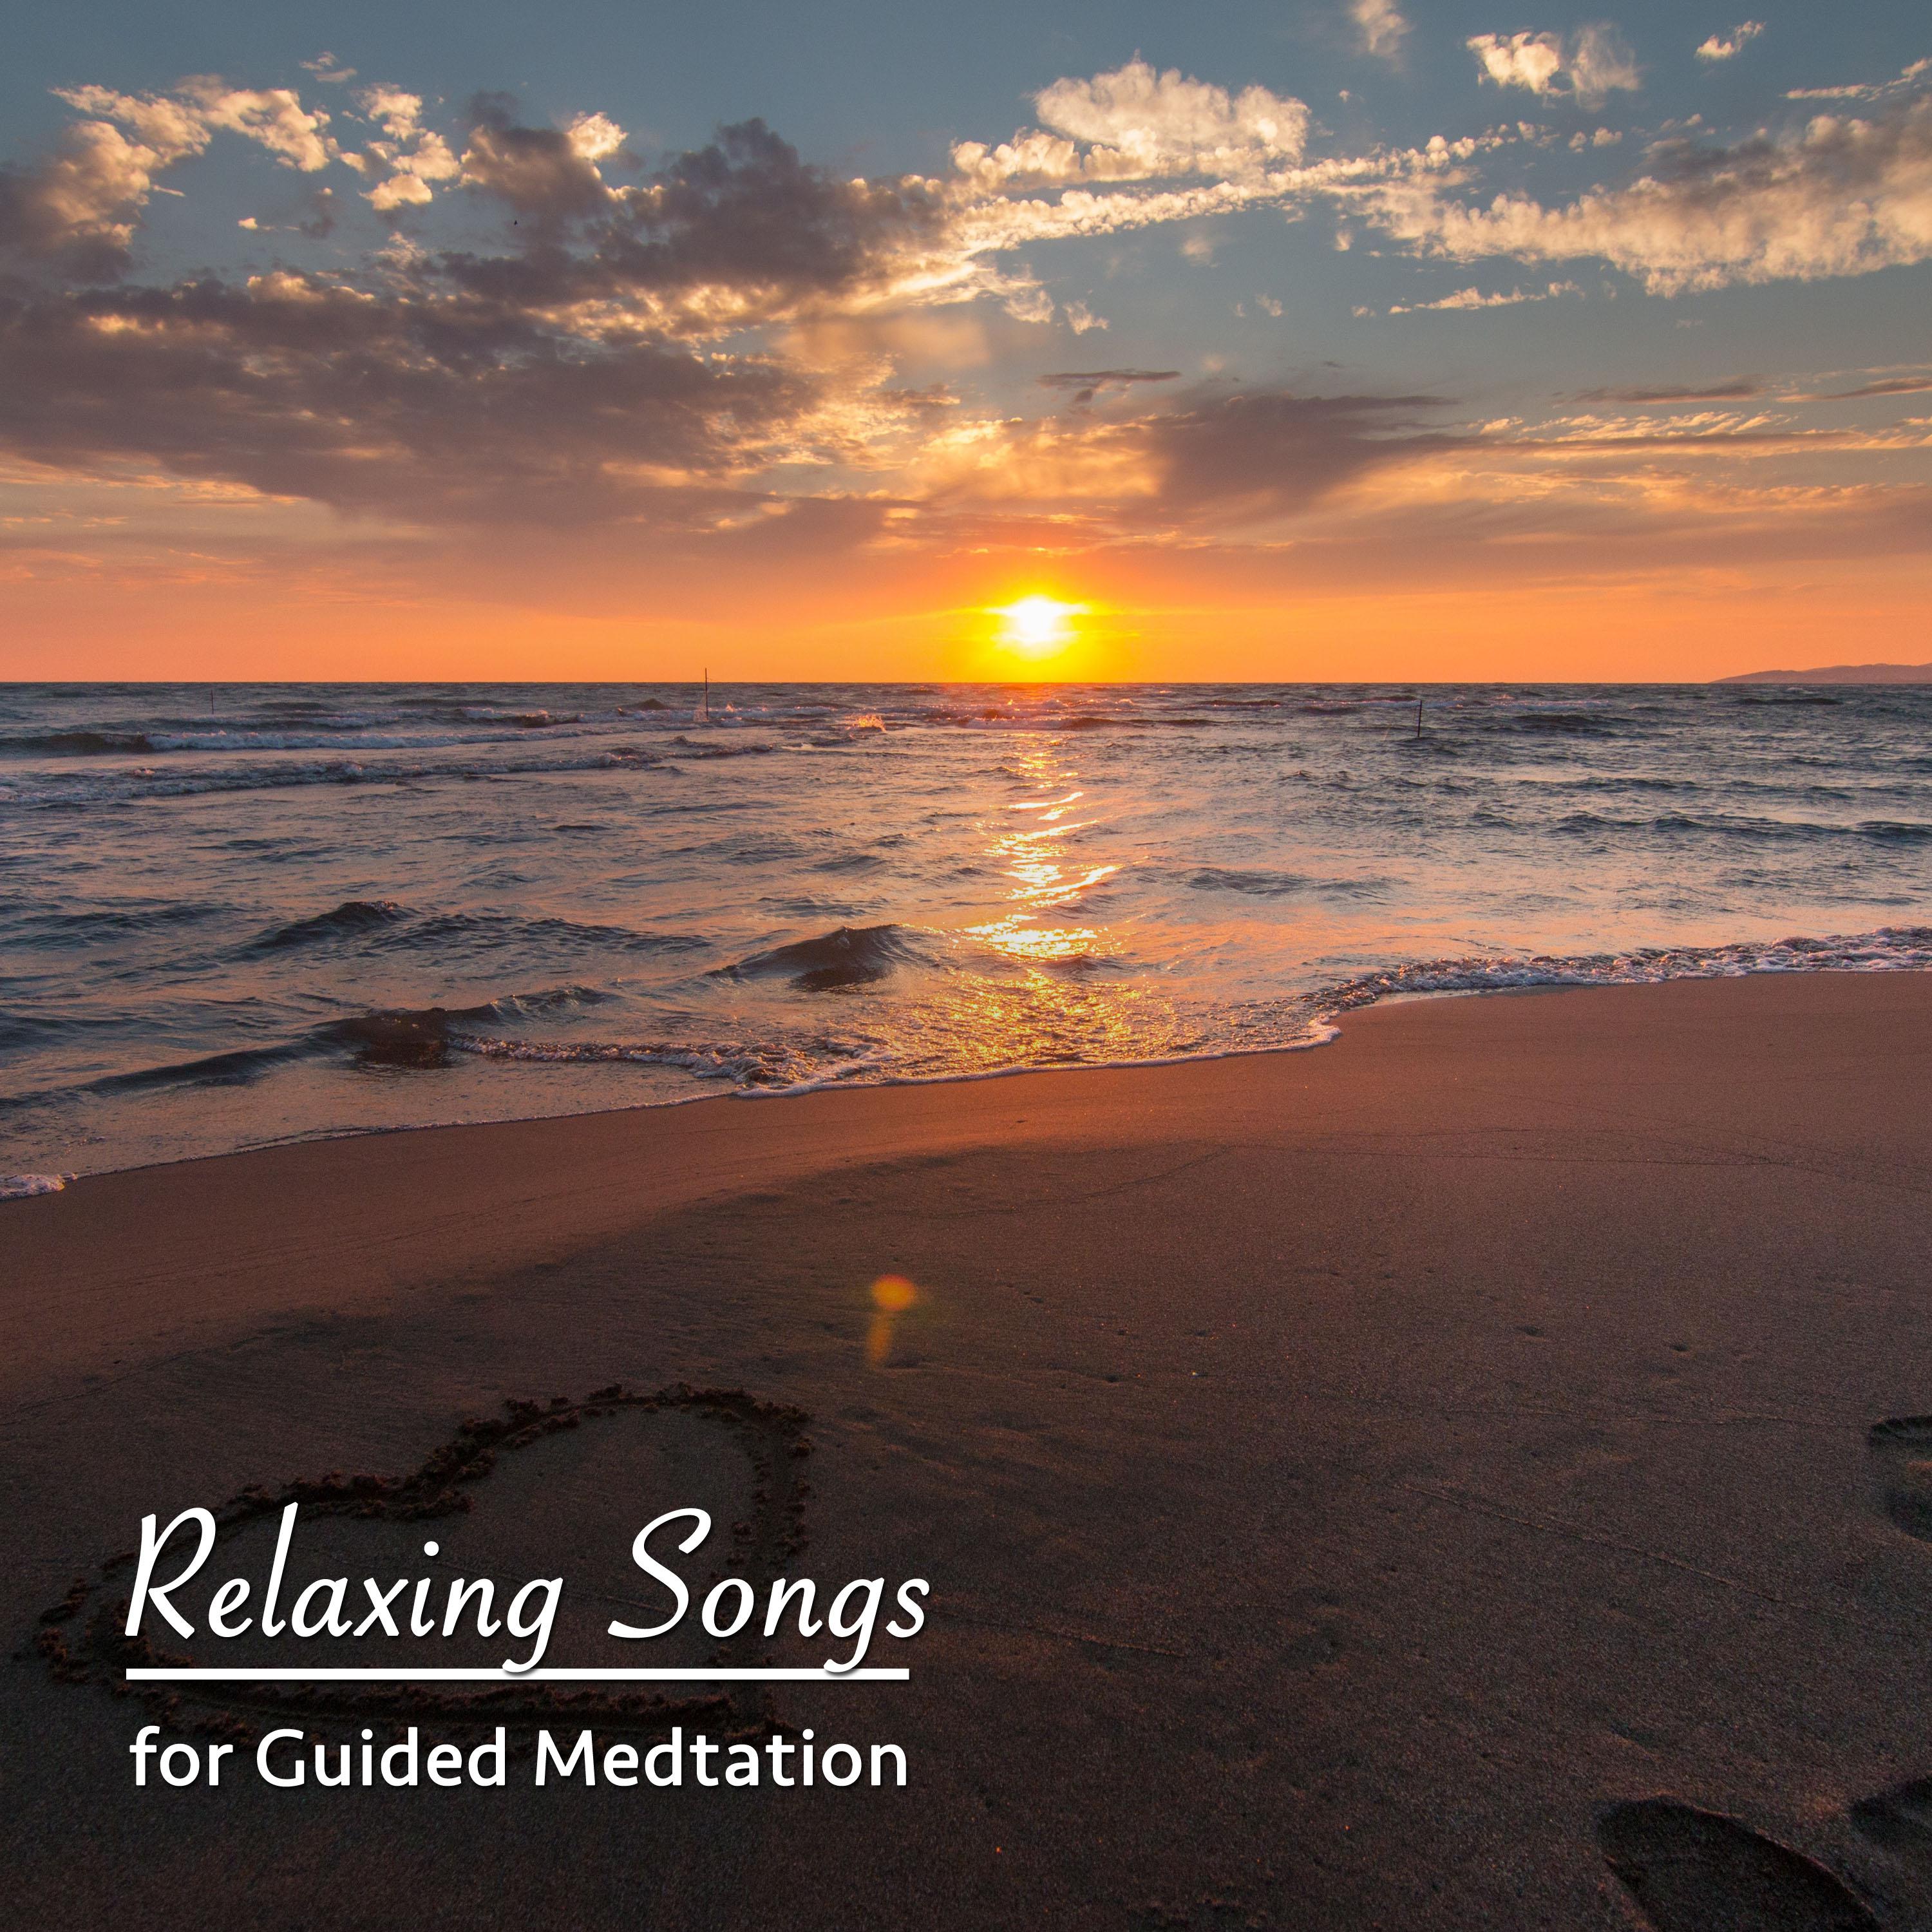 21 Relaxing Songs for Guided Meditation